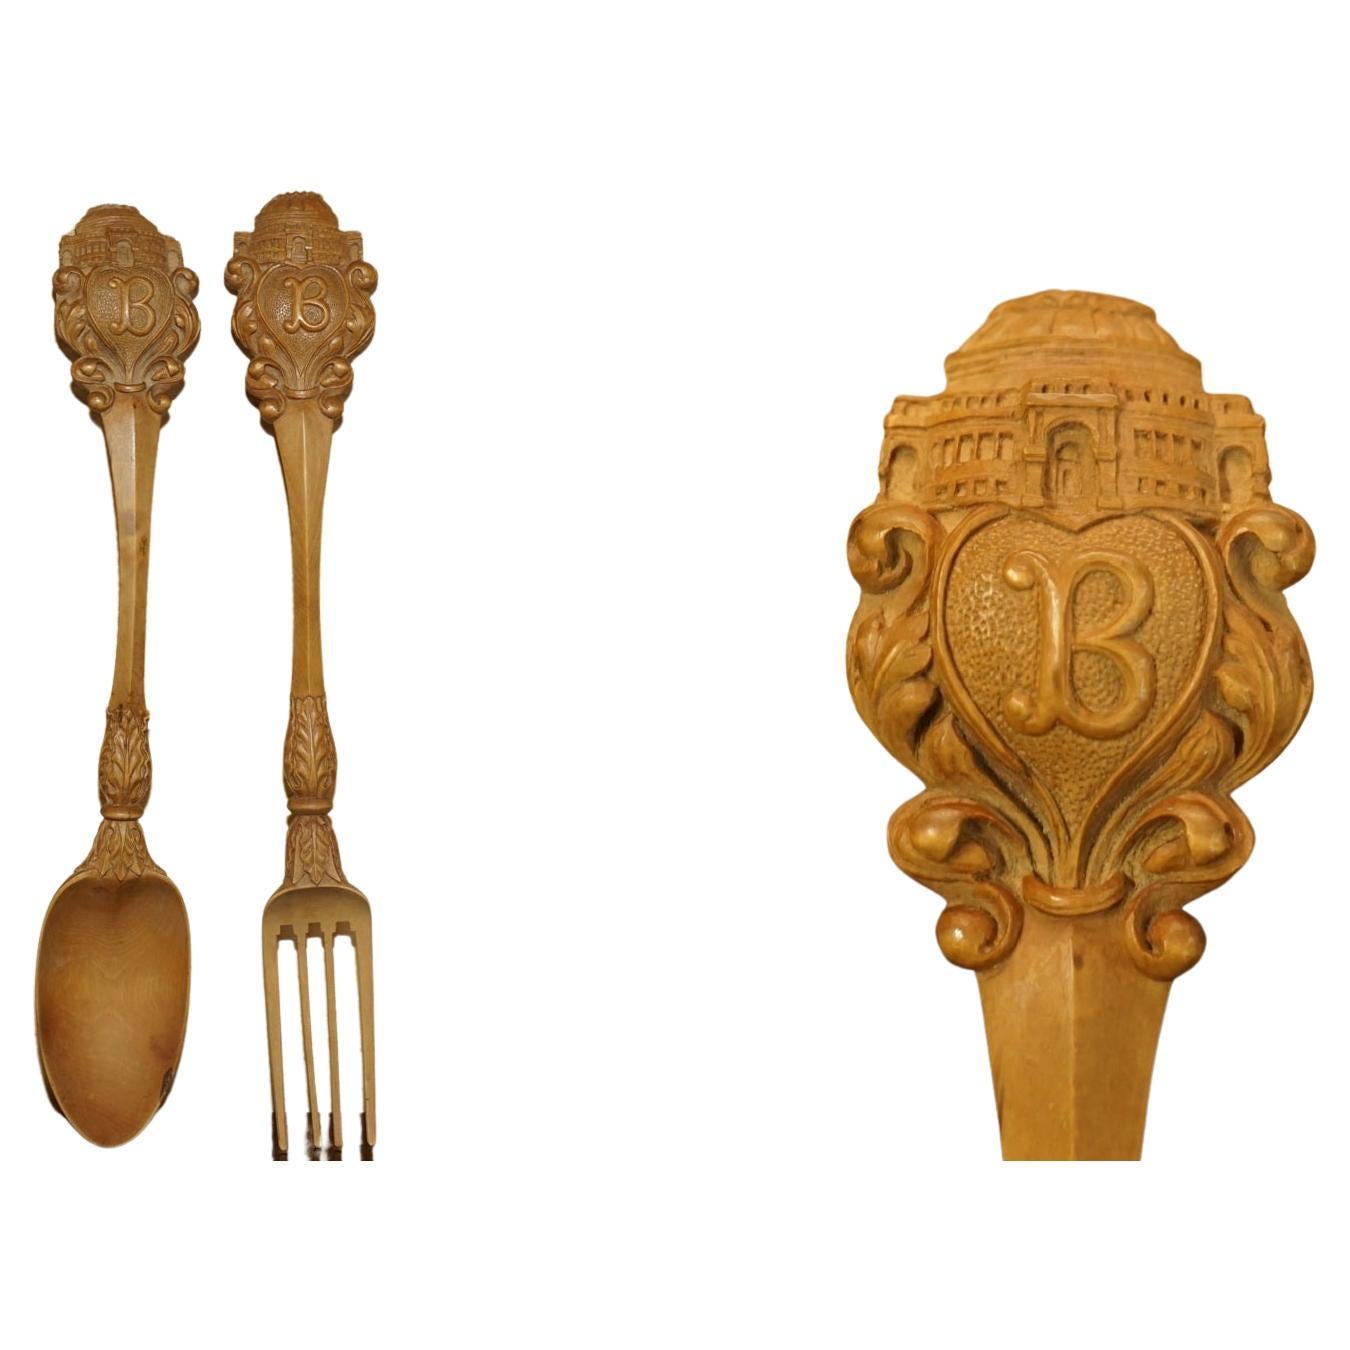 ANTIQUE HAND CARVED CIRCA 1900 ROYAL ALBERT HALL RETIREMENT GiFT FORK & SPOON